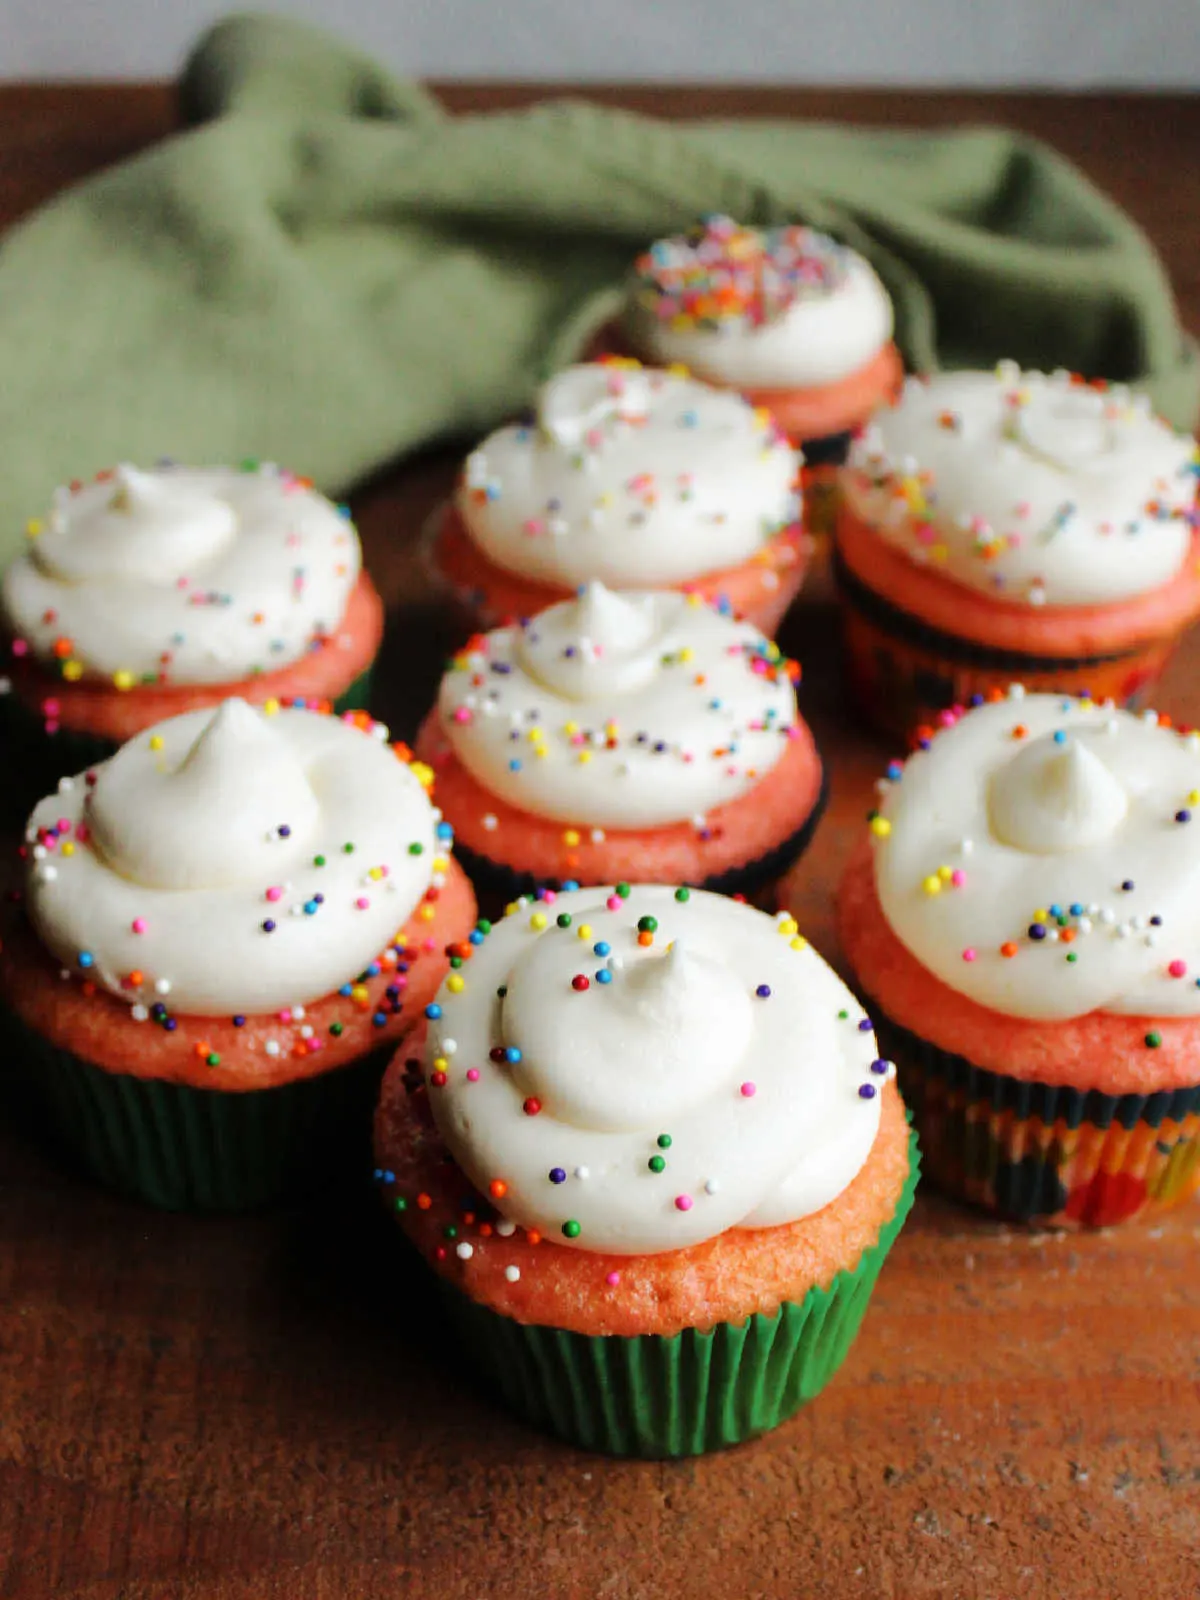 Smooth swirls of decorator's cream cheese frosting piped on pink strawberry cupcakes and topped with colorful sprinkles.